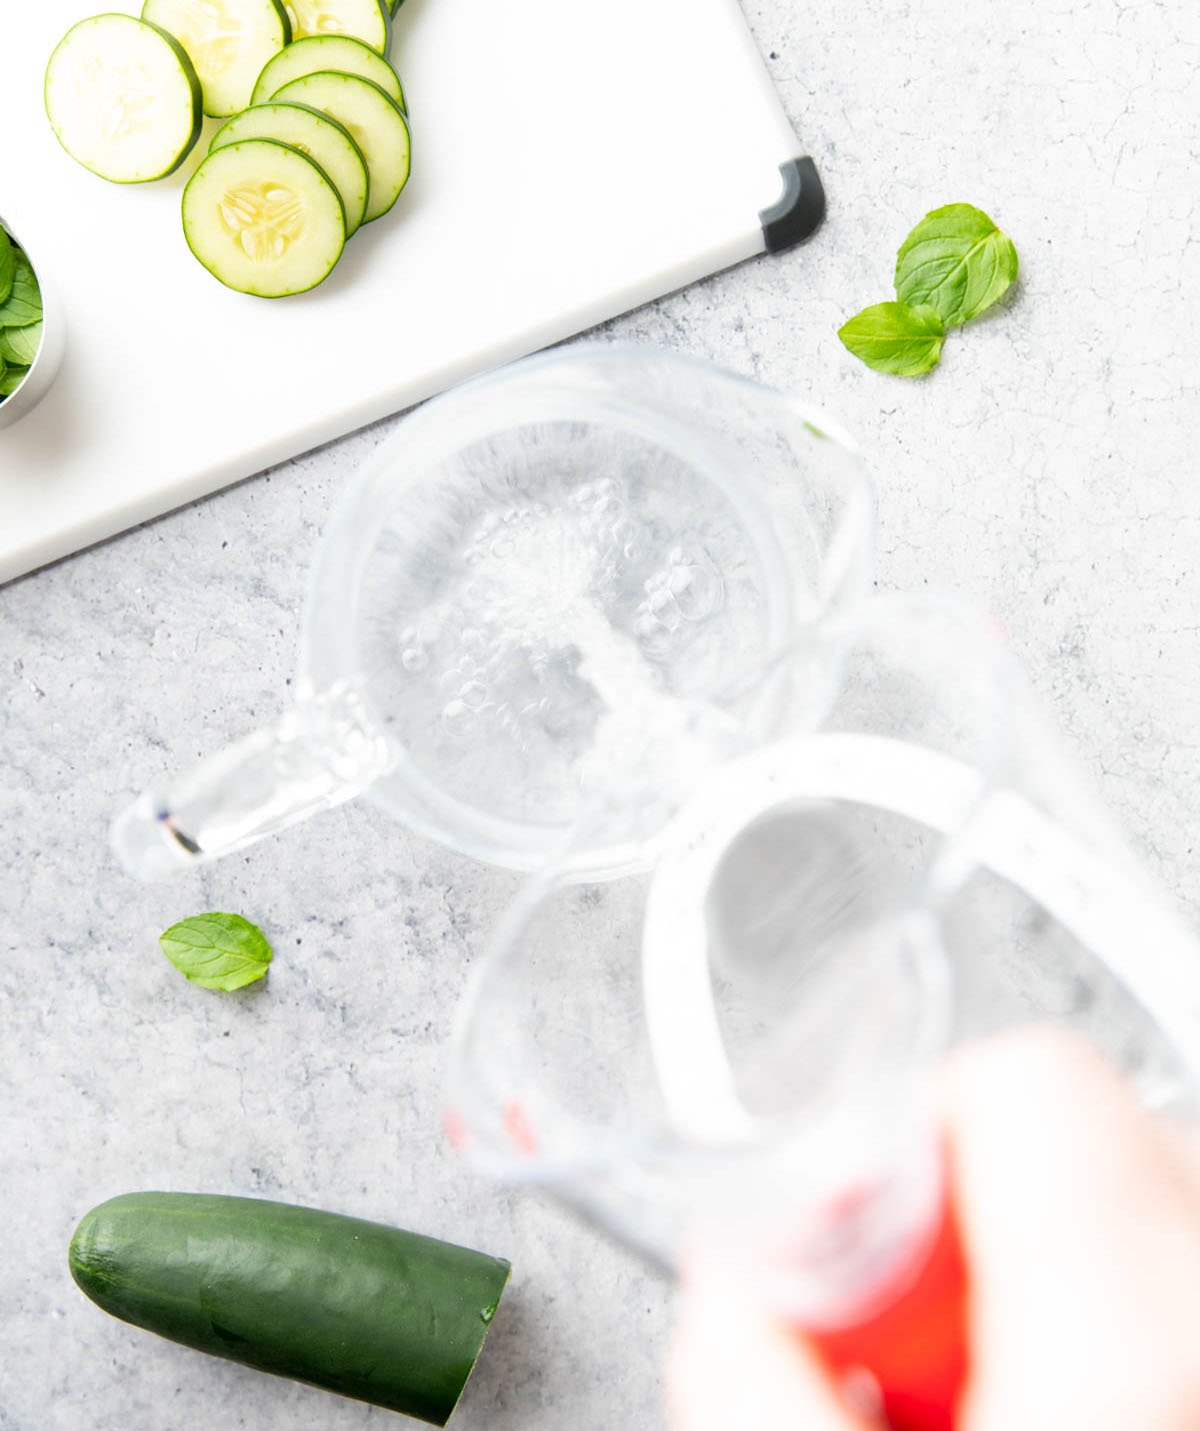 Two photos showing How to Make Cucumber Water – pouring filtered water into a pitcher